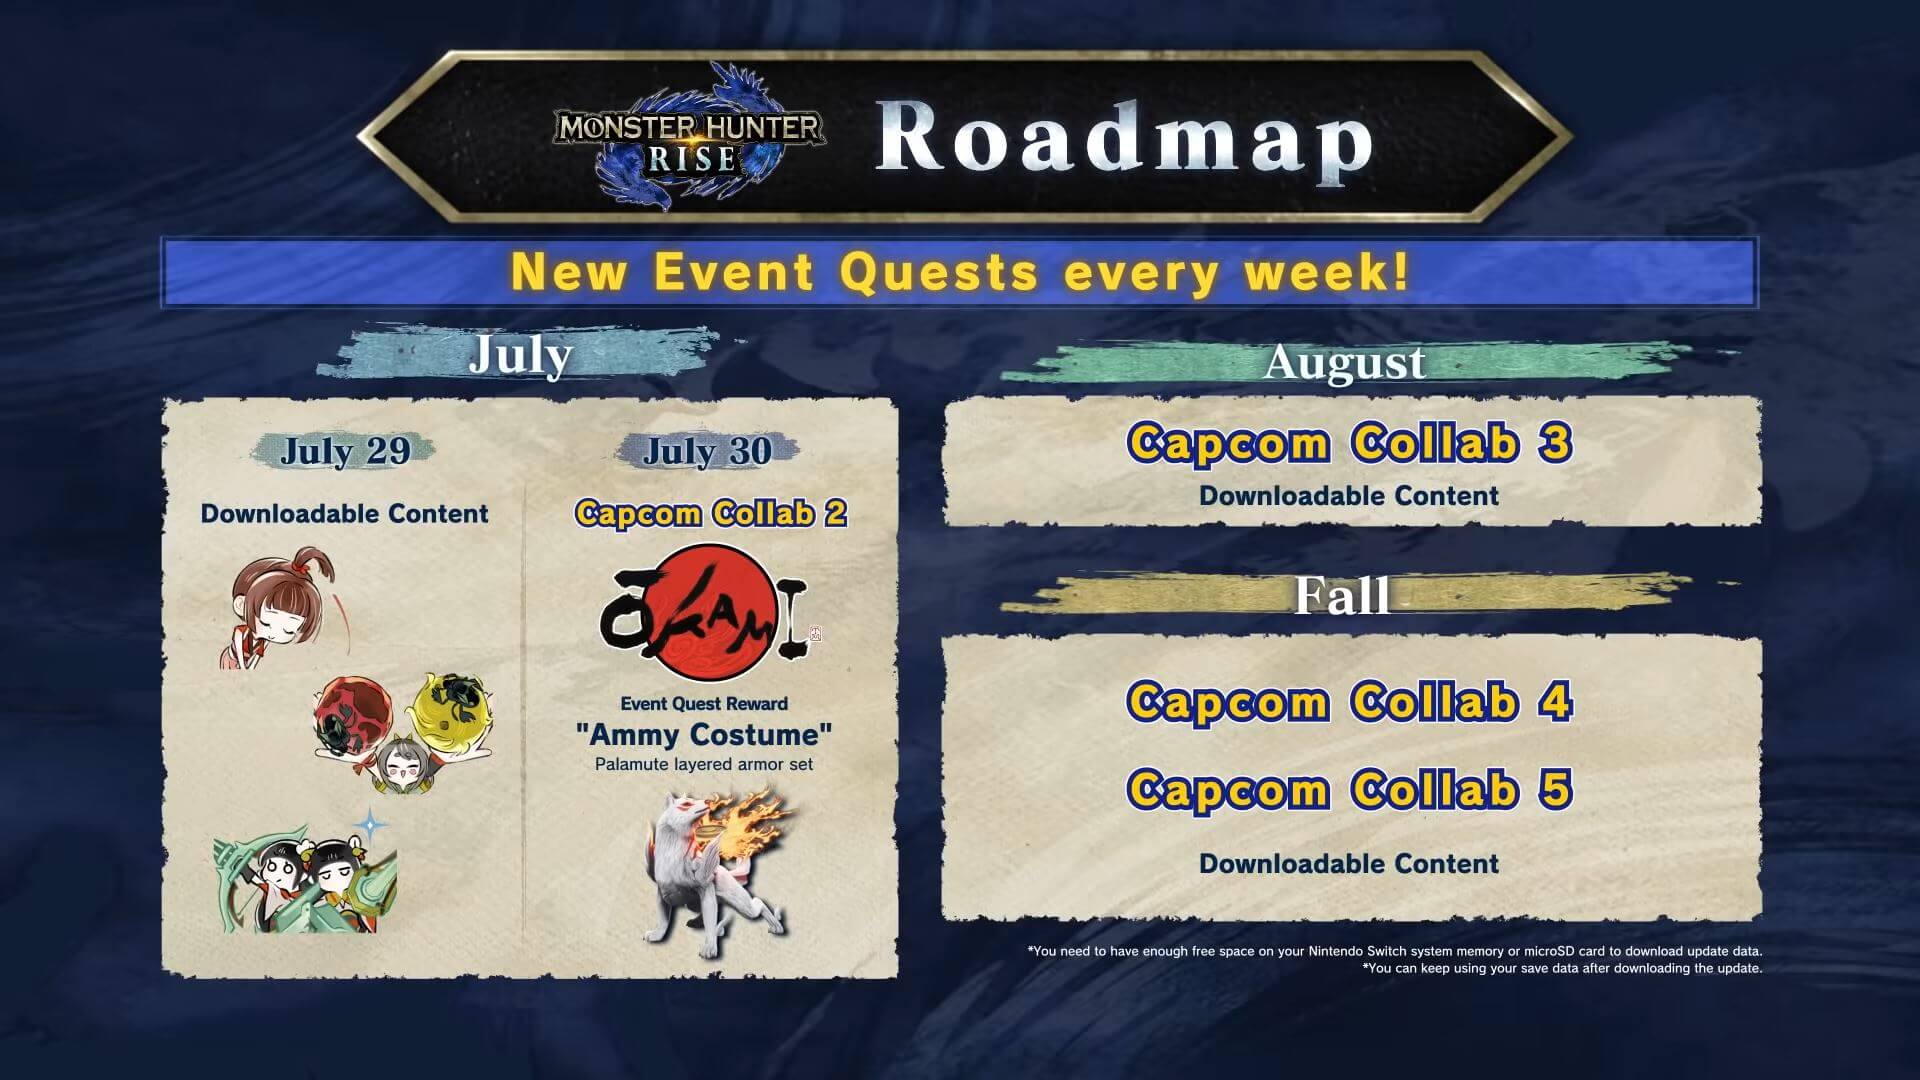 The roadmap for upcoming Monster Hunter Rise content